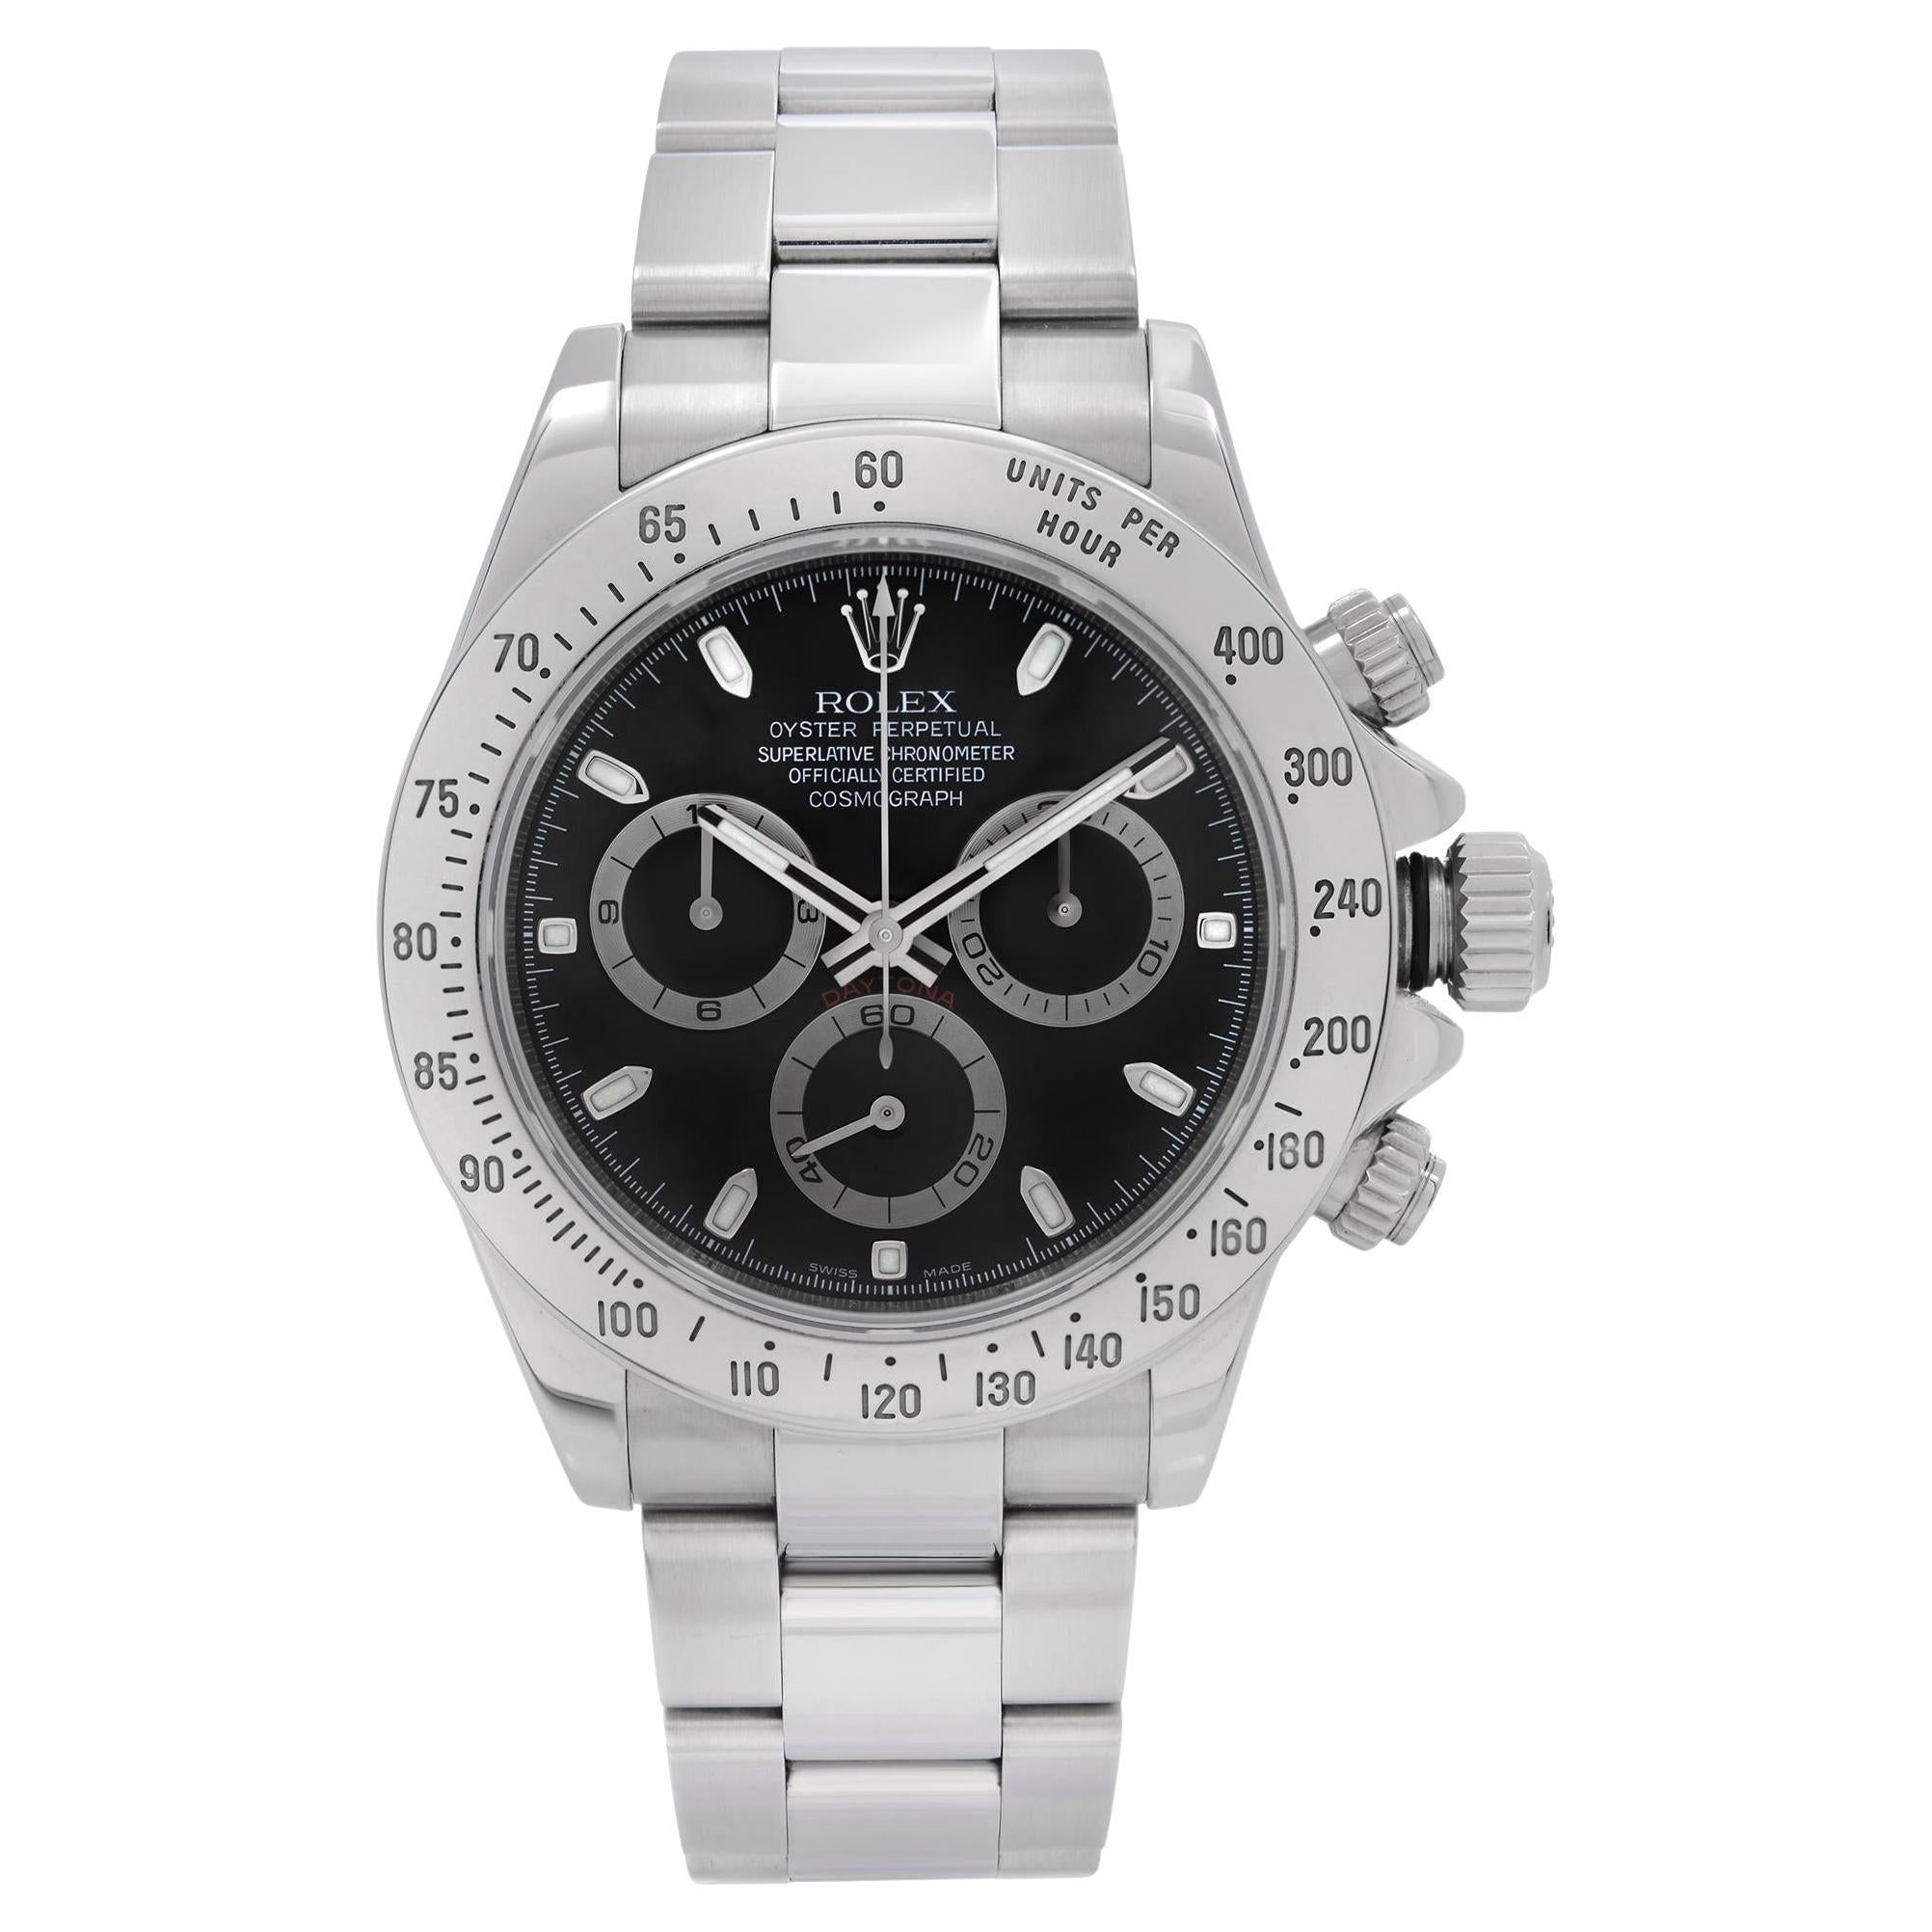 Rolex Cosmograph Daytona Steel Black Index Dial Automatic Mens Watch 116520 For Sale